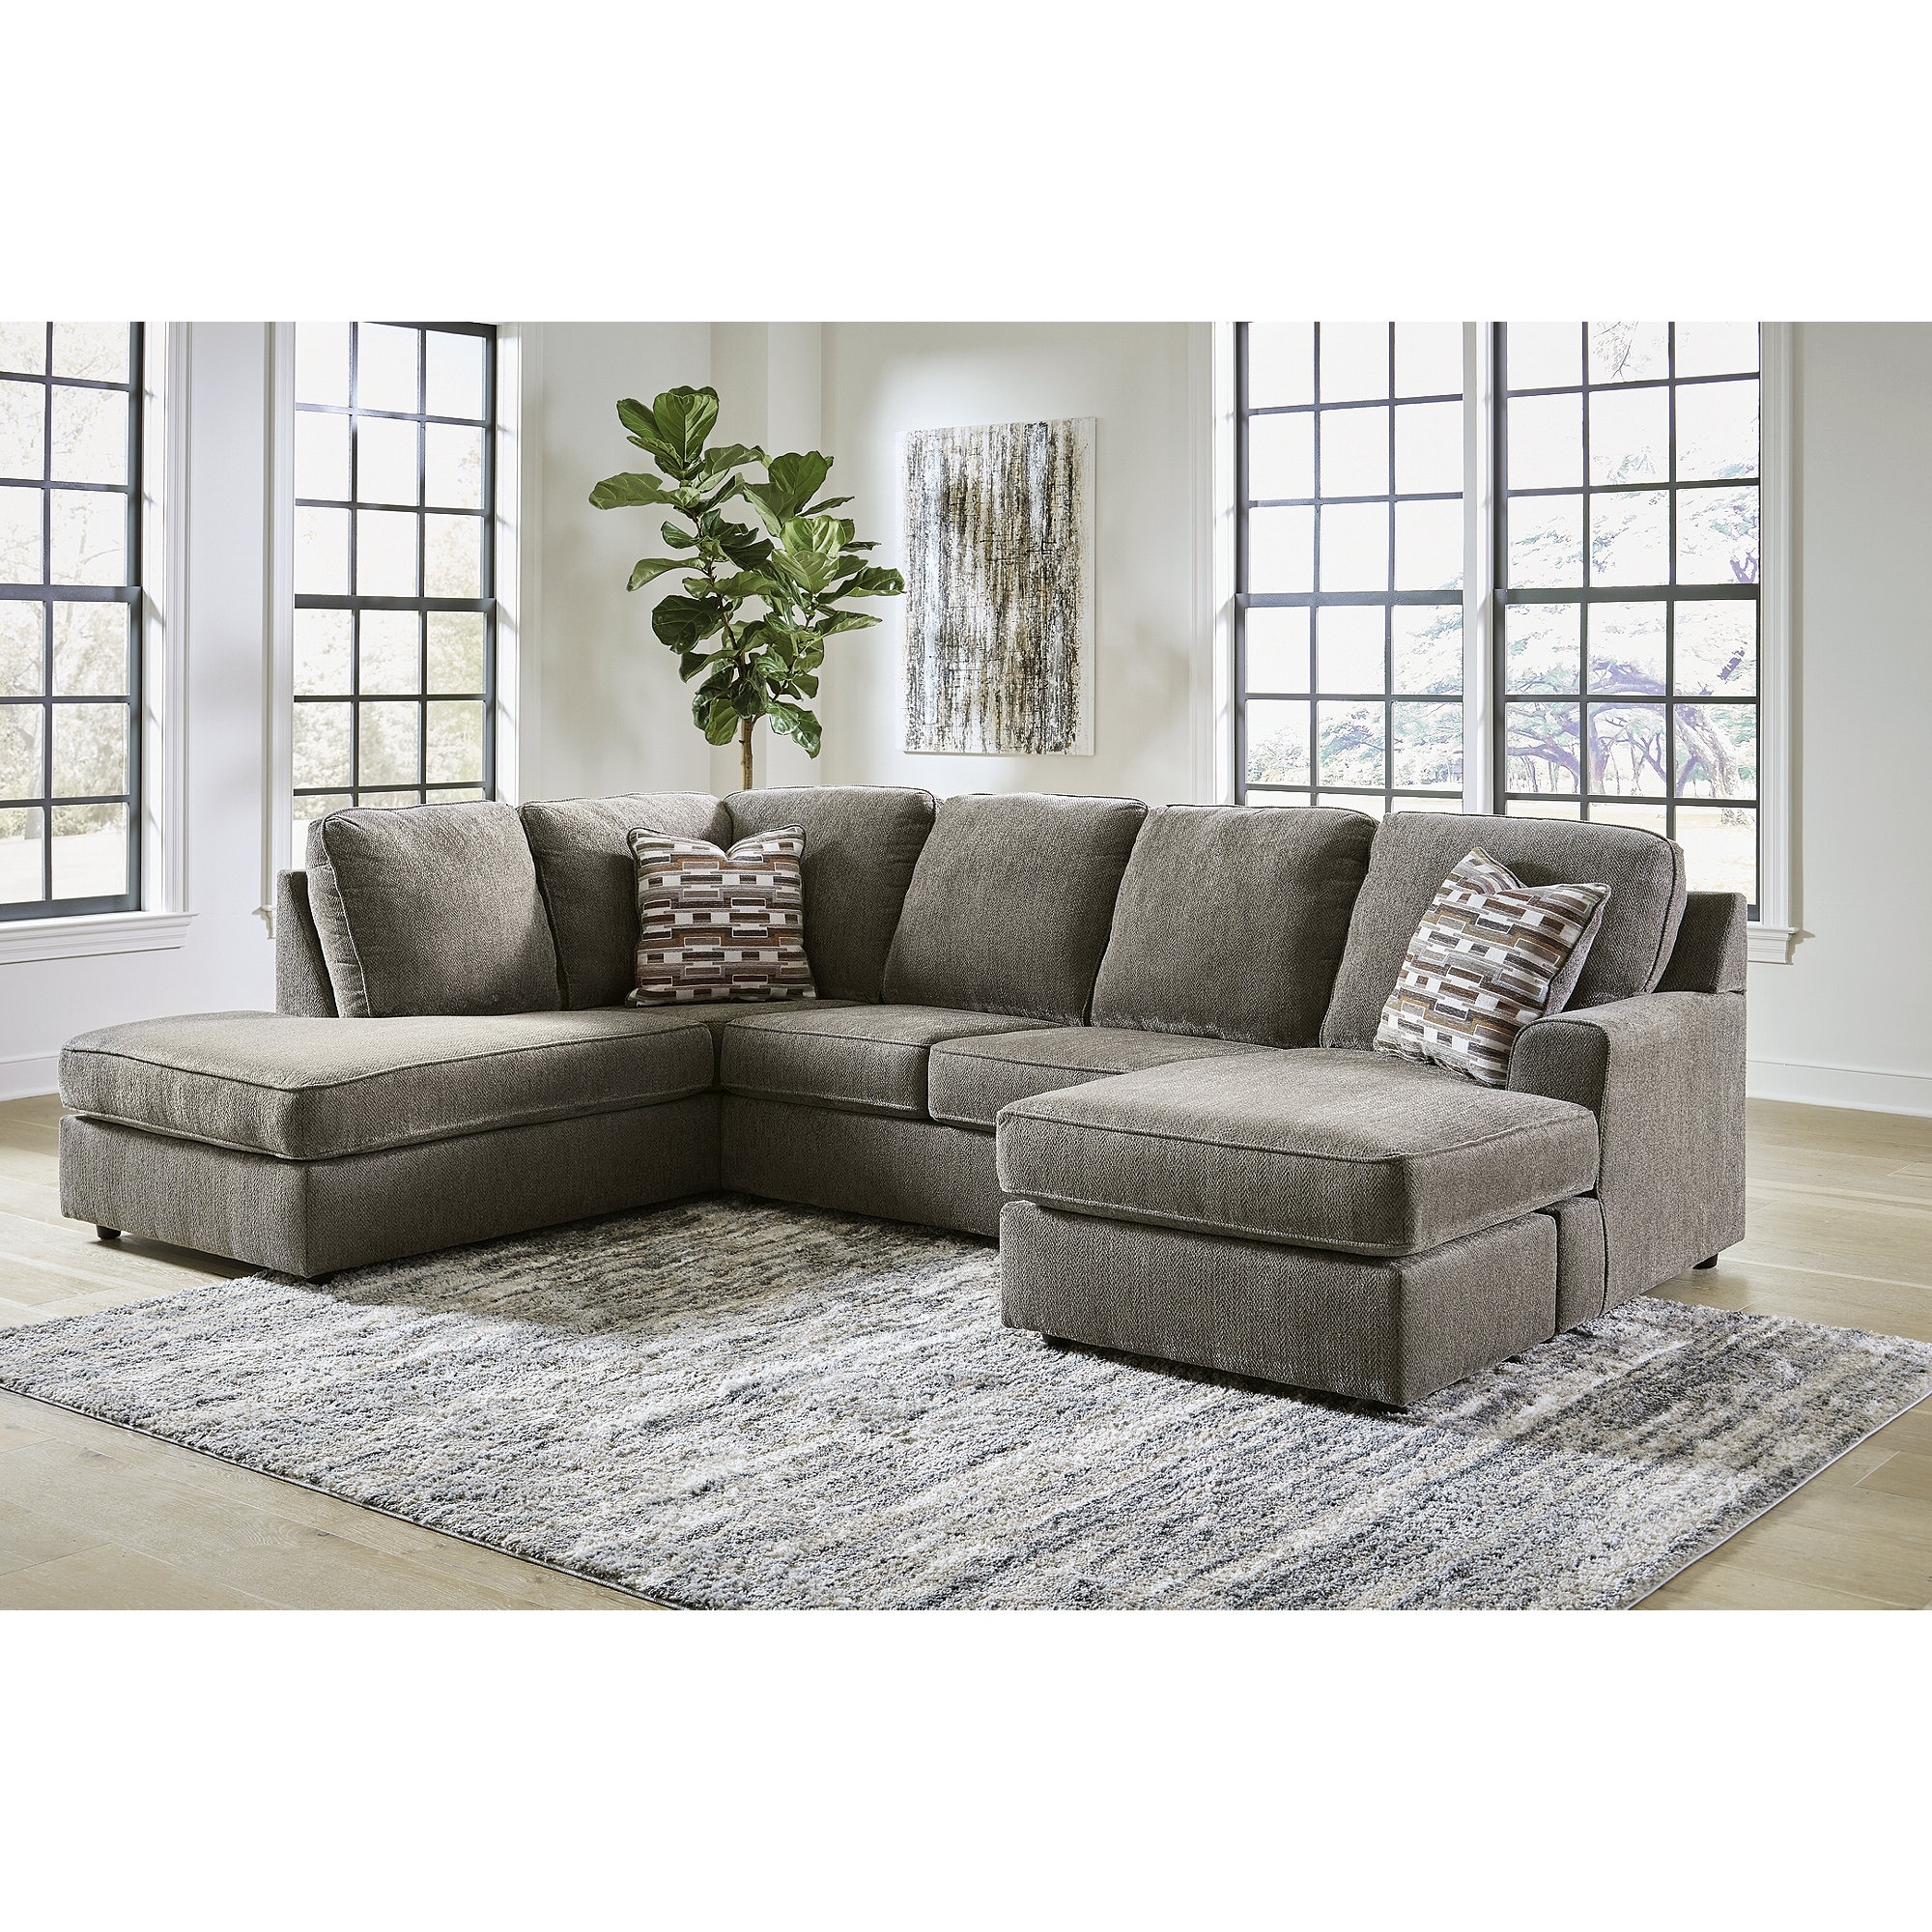 Signature Design By Ashley Ophannon Putty 2-piece Sectional With Chaise - 125w X 86d X 38h